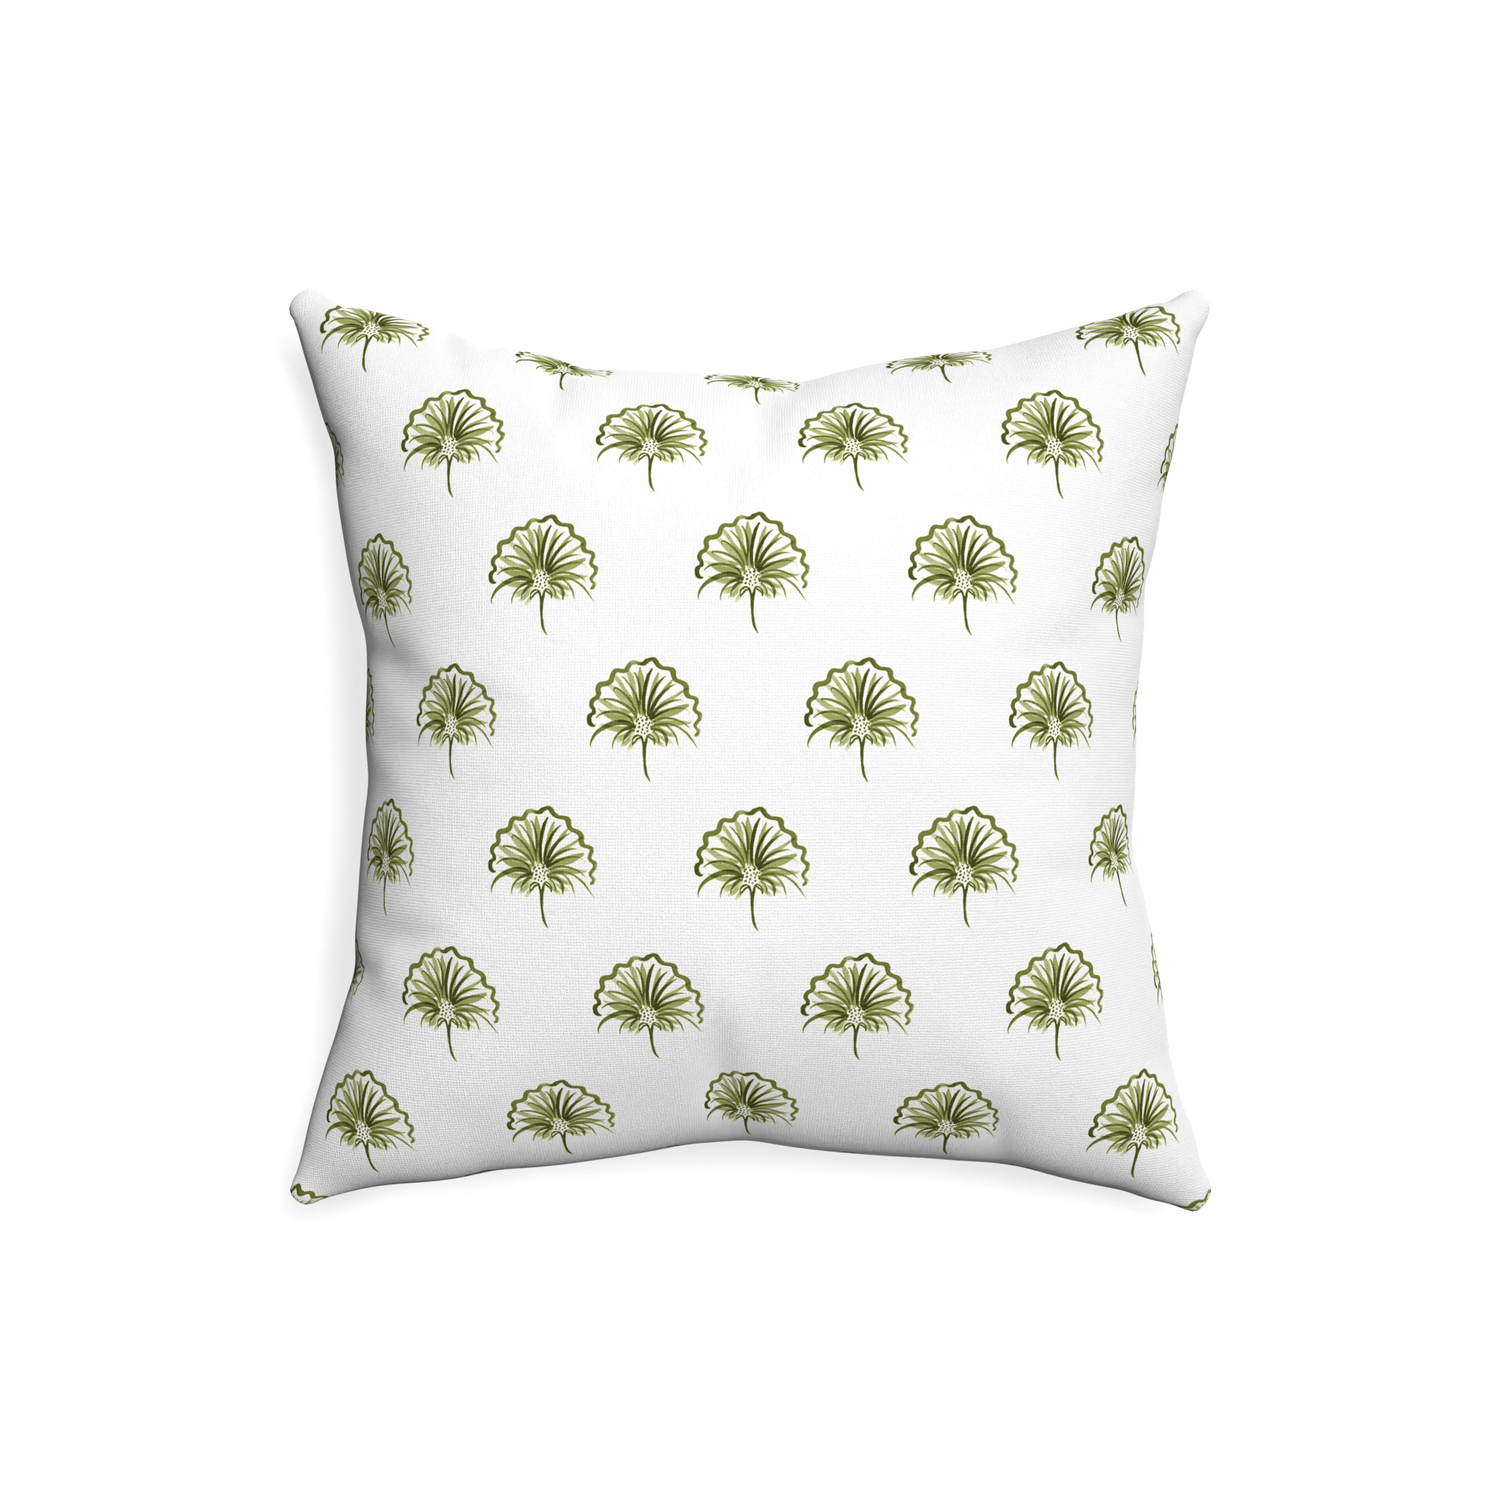 20-square penelope moss custom pillow with none on white background